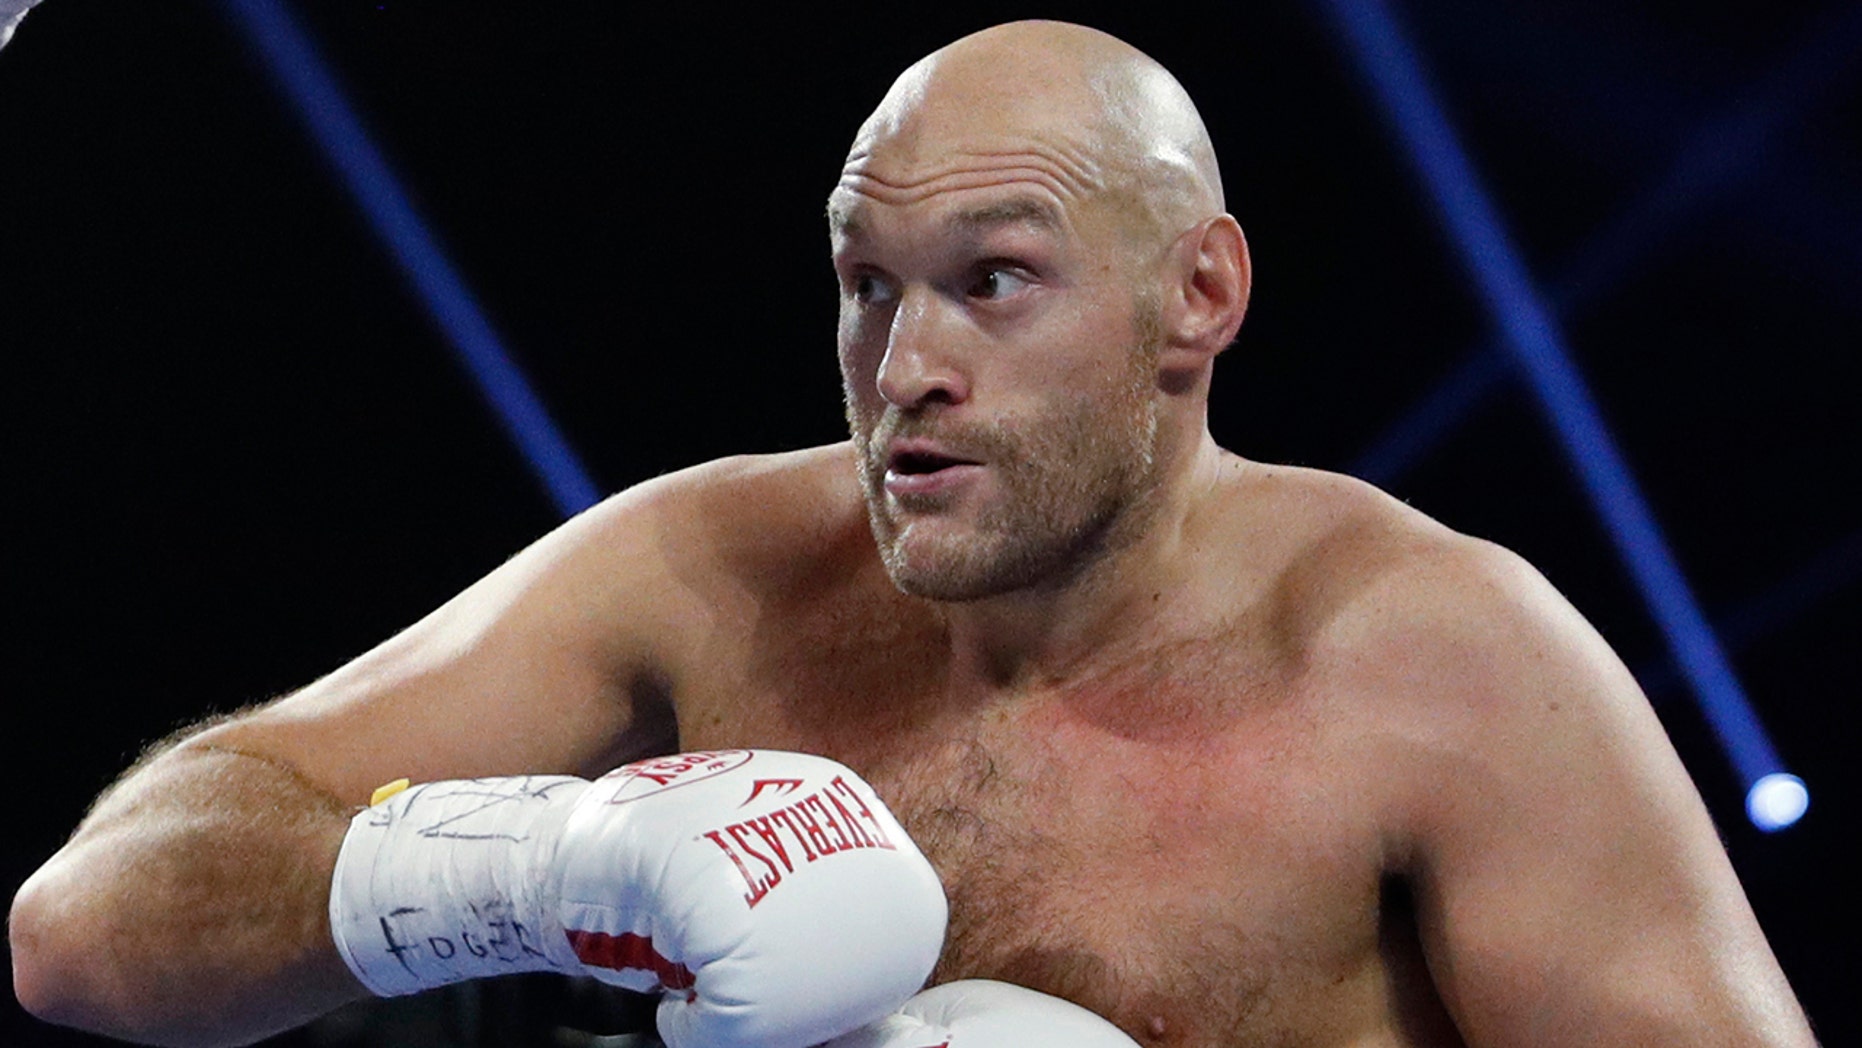 FILE - In this file photo dated Saturday, June 15, 2019, Tyson Fury, of England in action against Tom Schwarz of Germany, in Las Vegas, USA. Tyson Fury has changed trainers just two months before his likely heavyweight rematch with WBC champion Deontay Wilder, it is revealed Monday Dec. 16, 2019. (AP Photo/John Locher, FILE)